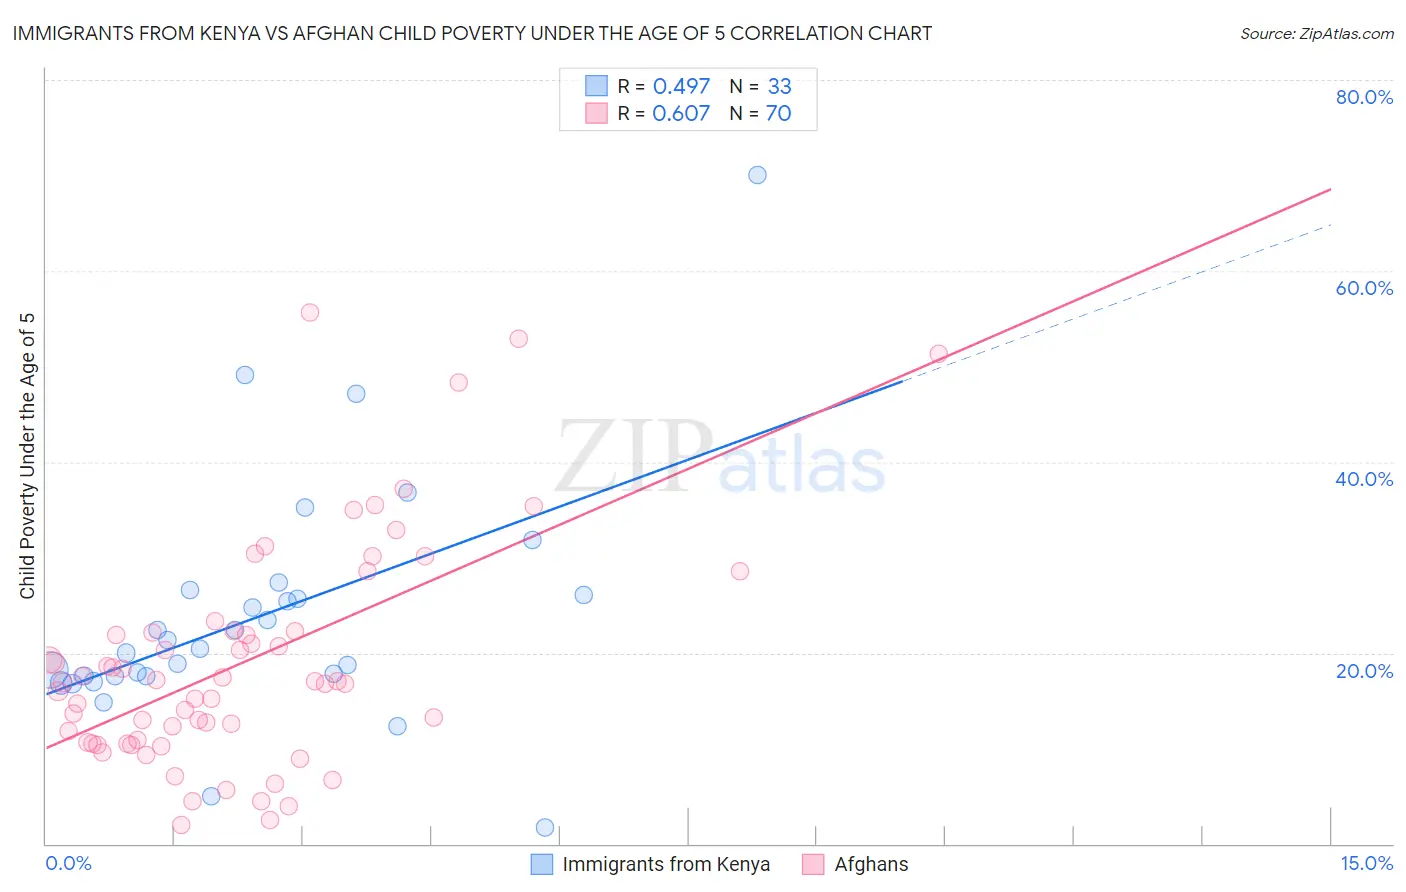 Immigrants from Kenya vs Afghan Child Poverty Under the Age of 5